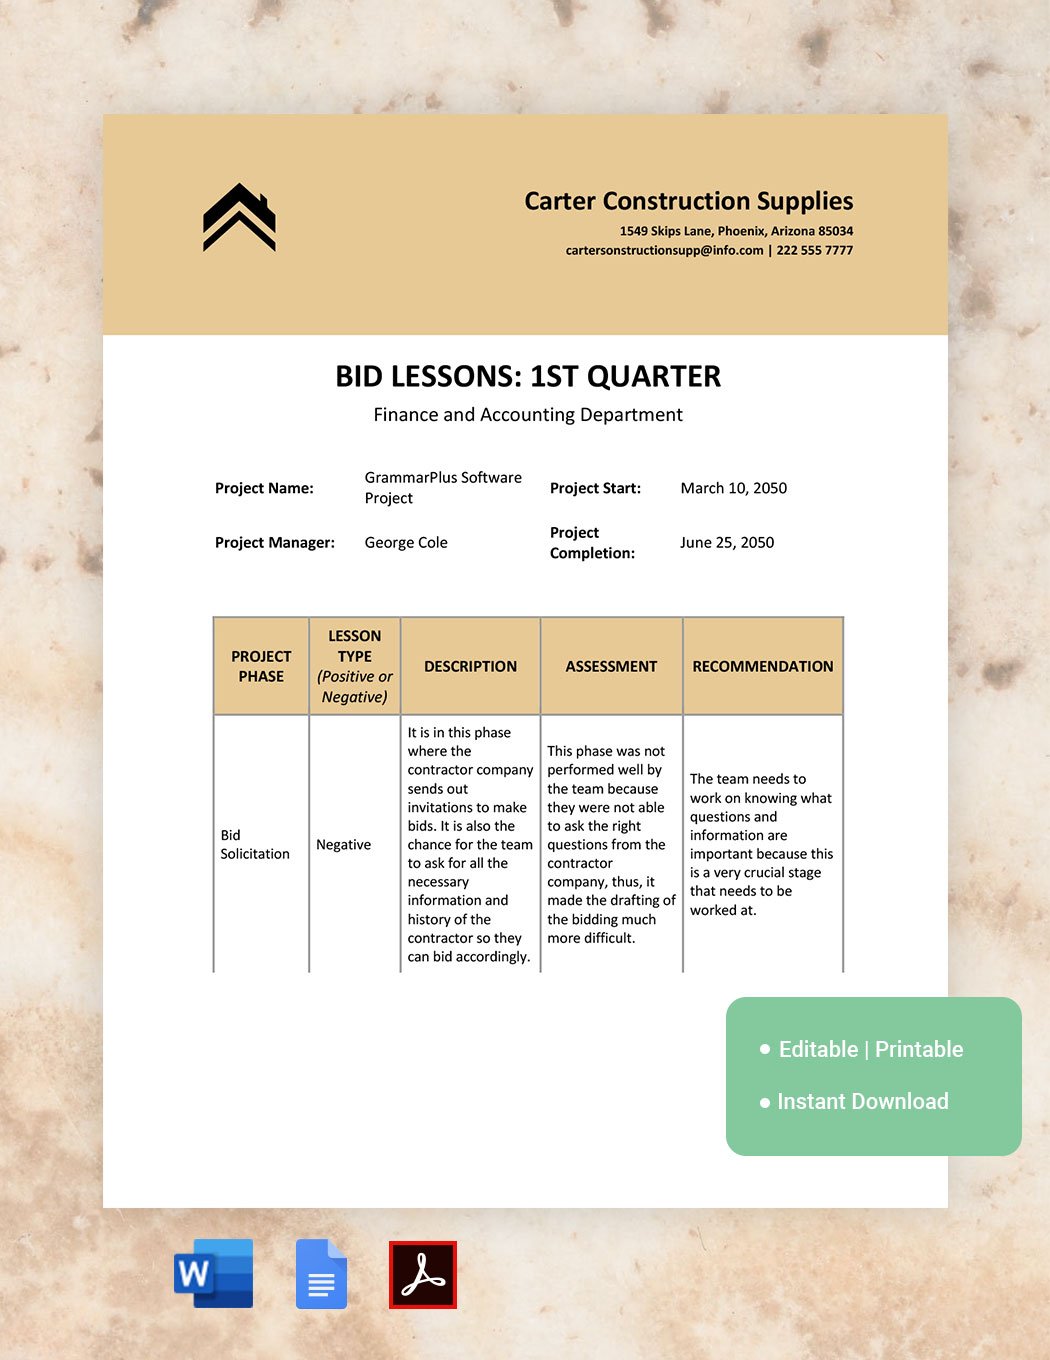 Bid Lessons Learned Template in Word, Google Docs